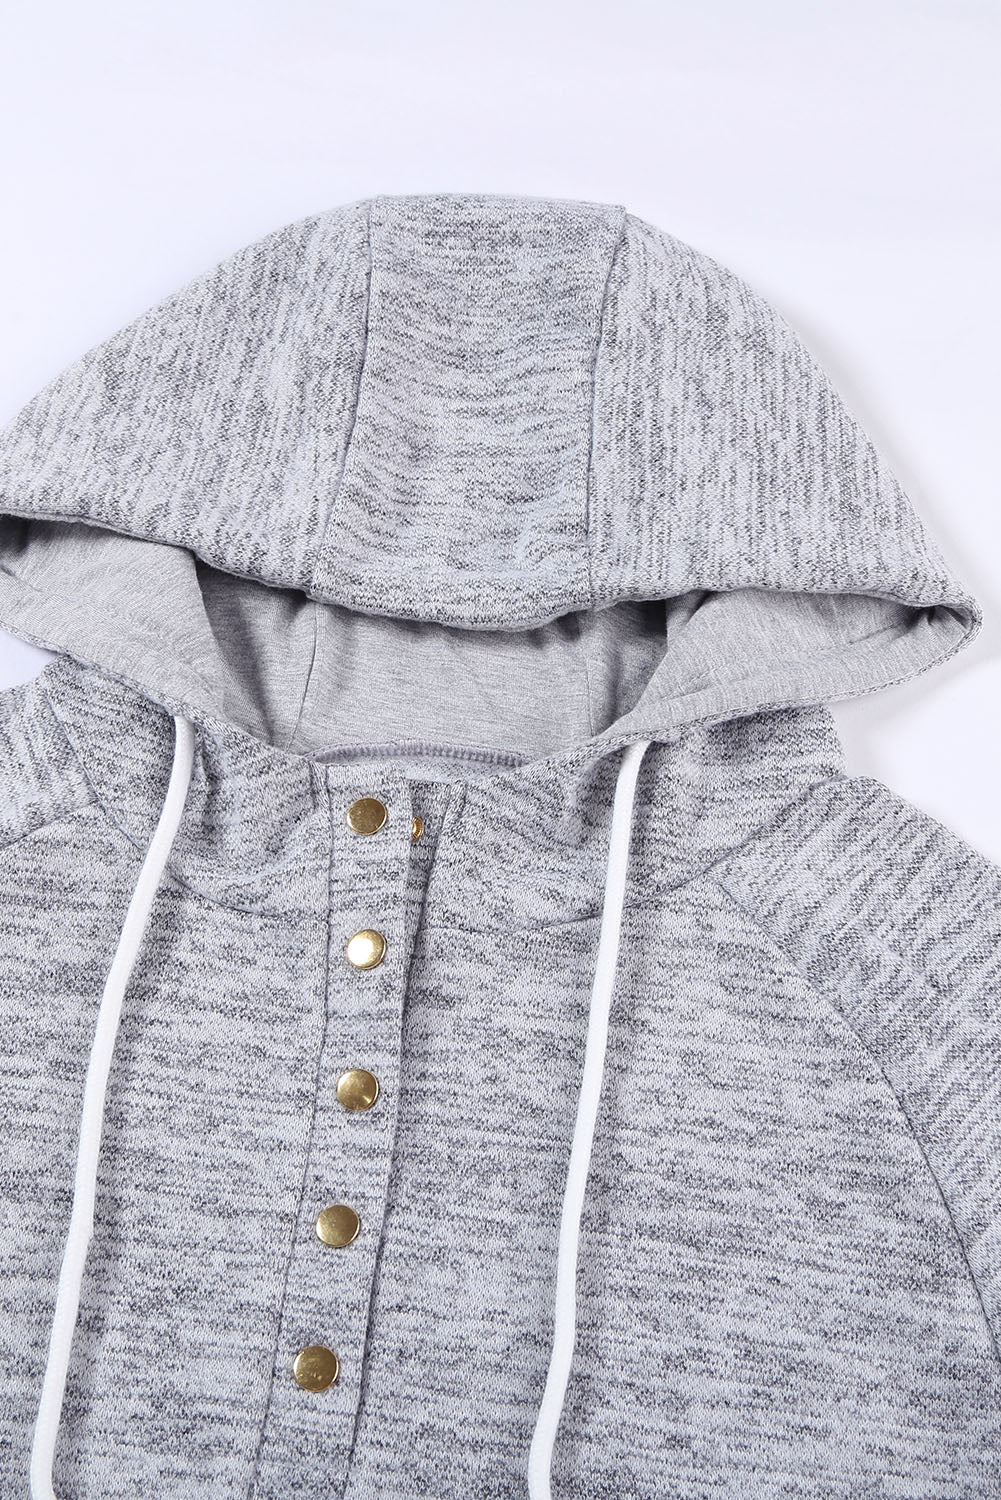 Women's Gray Pocket Design Buttoned Casual Hoodie